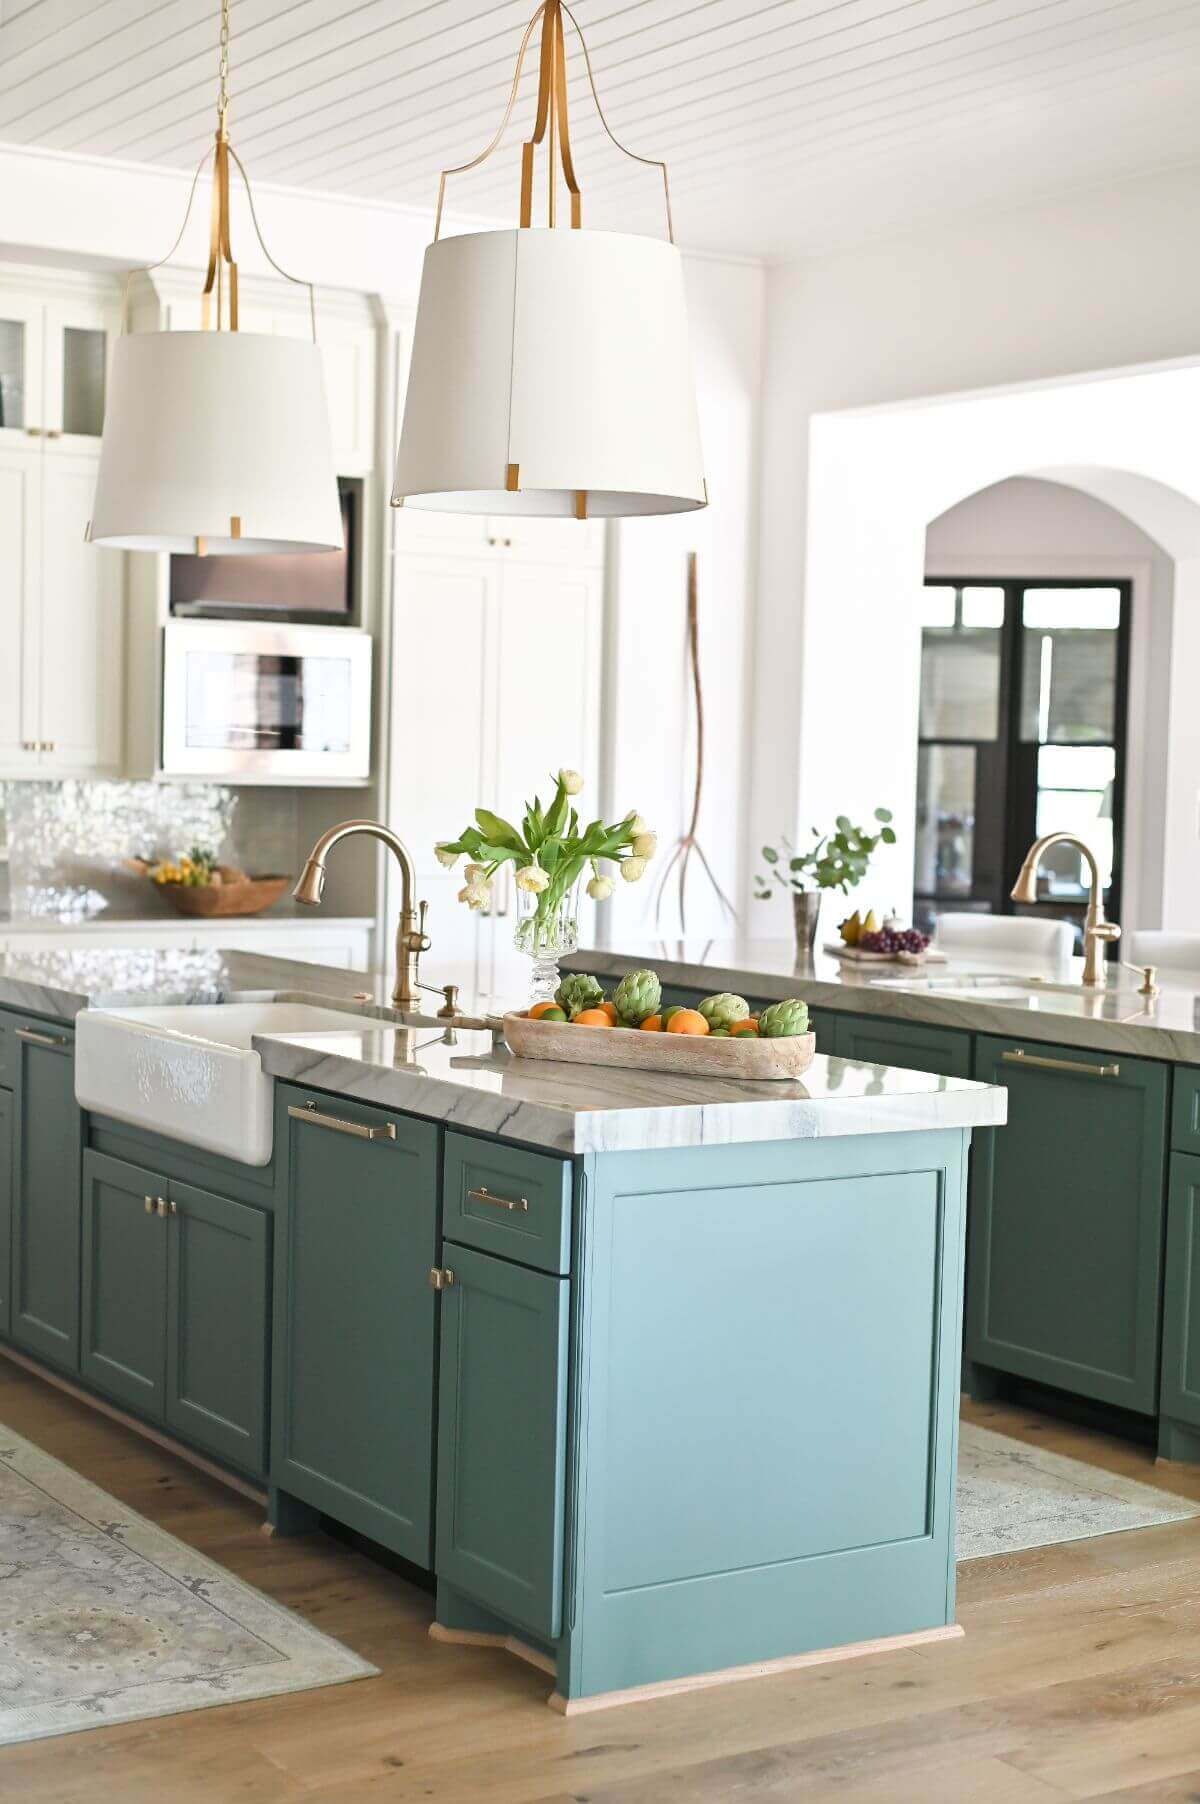 Modern French country kitchen with teal painted island, wood range hood, and paneled refrigerator - Morningstar Builders. #modernfrenchkitchen #frenchcountryinteriors